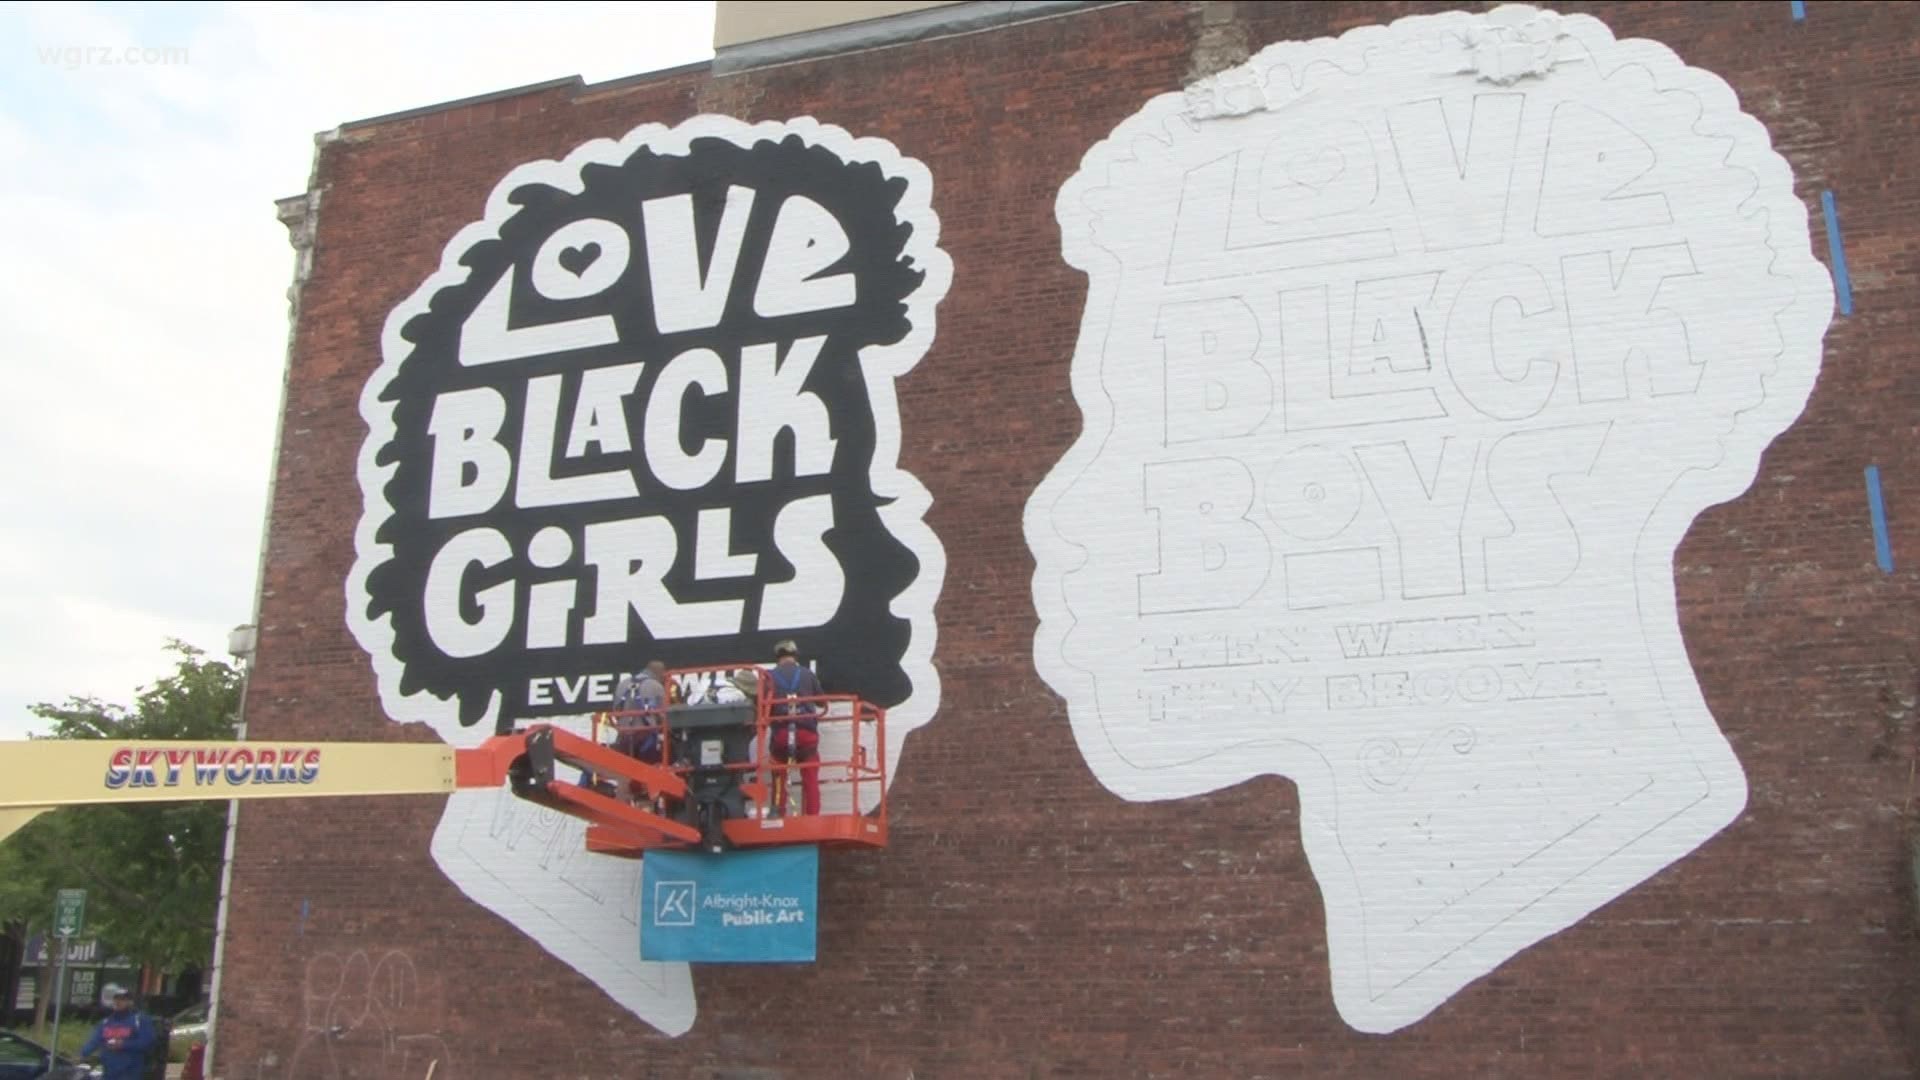 Its features two silhouetted profiles with the messages "Love black boys when they become men and love black girls when they become women."